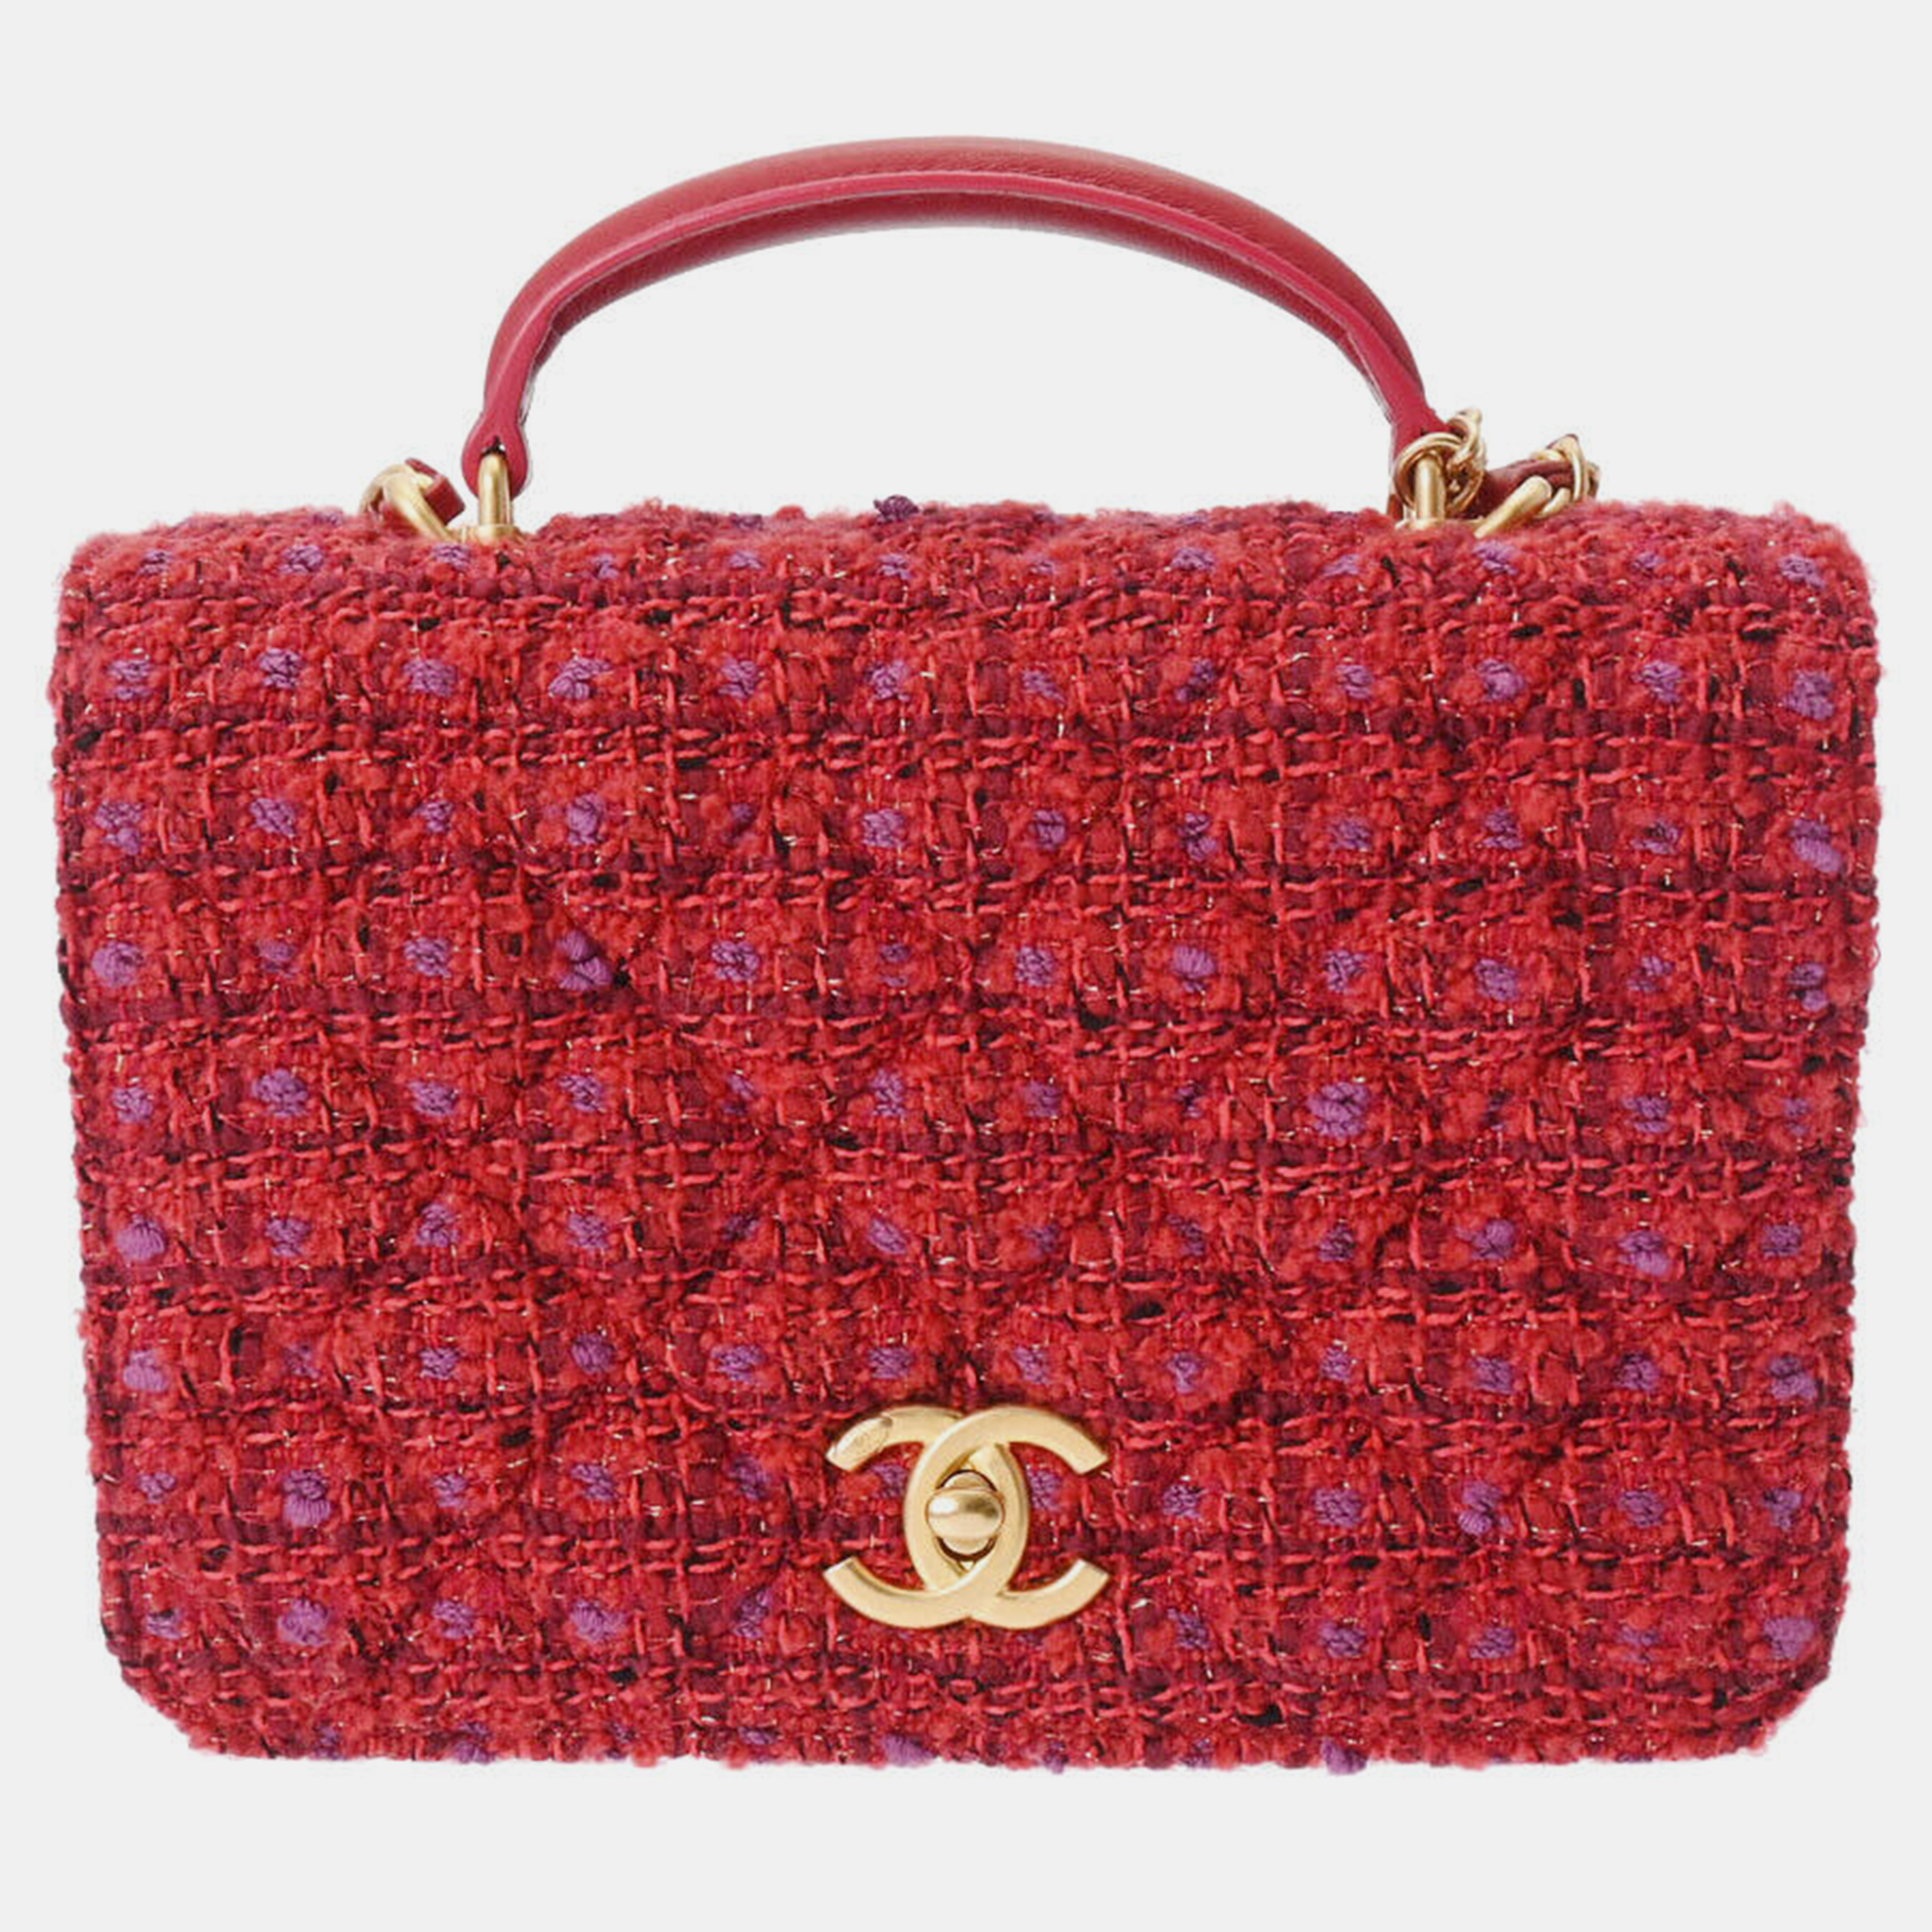 Pre-owned Chanel Red Tweed Cc Flap Bag